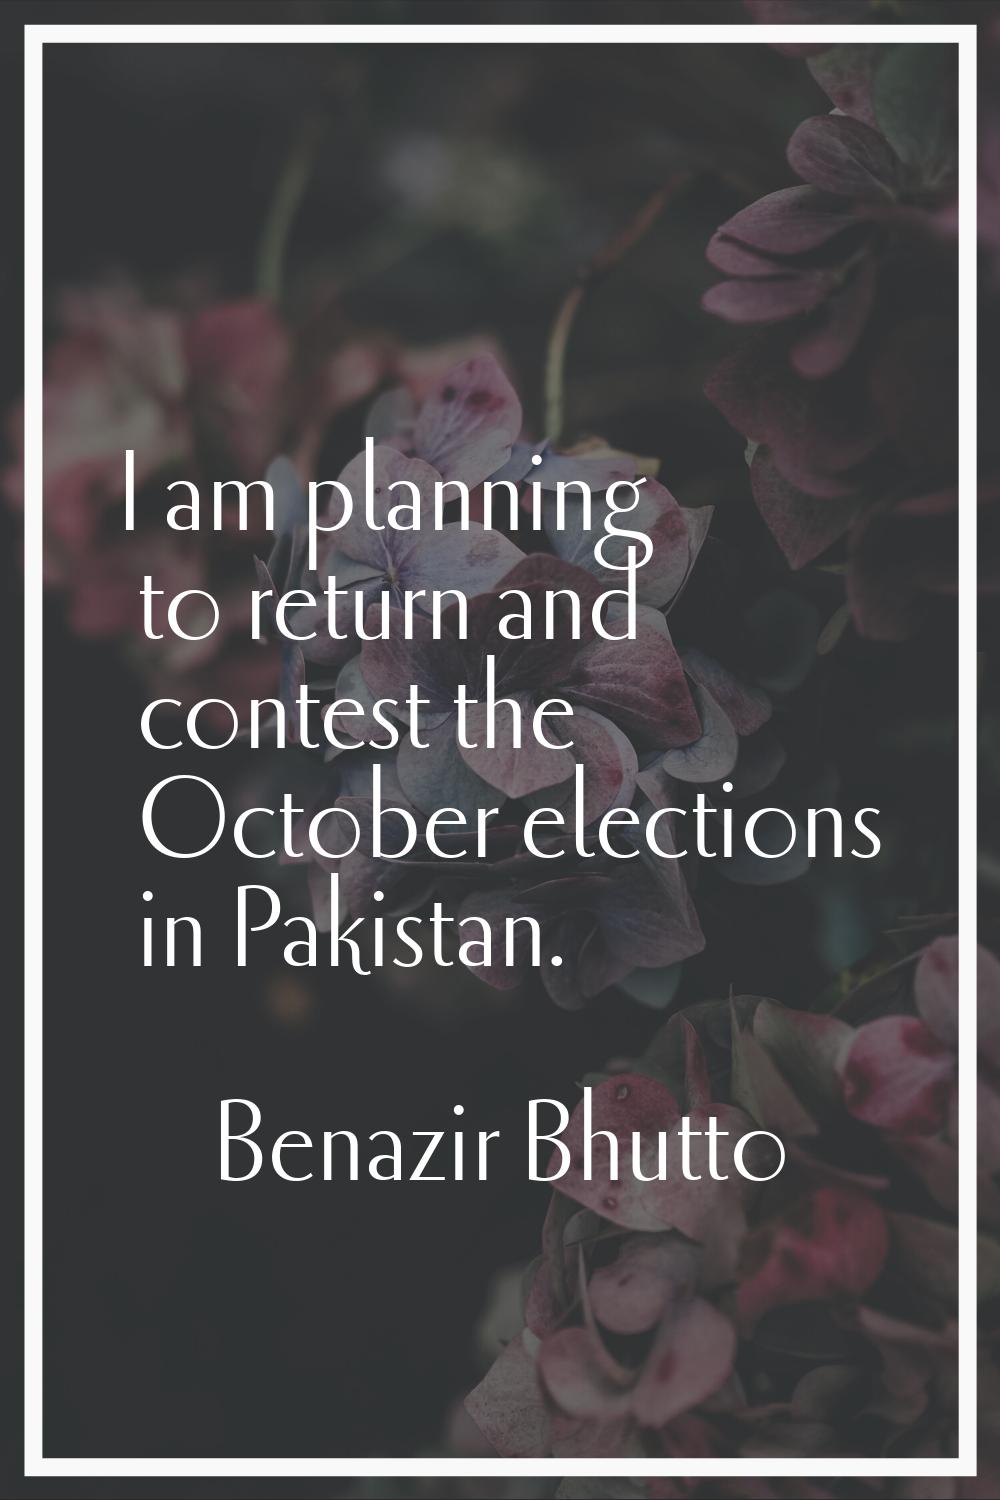 I am planning to return and contest the October elections in Pakistan.